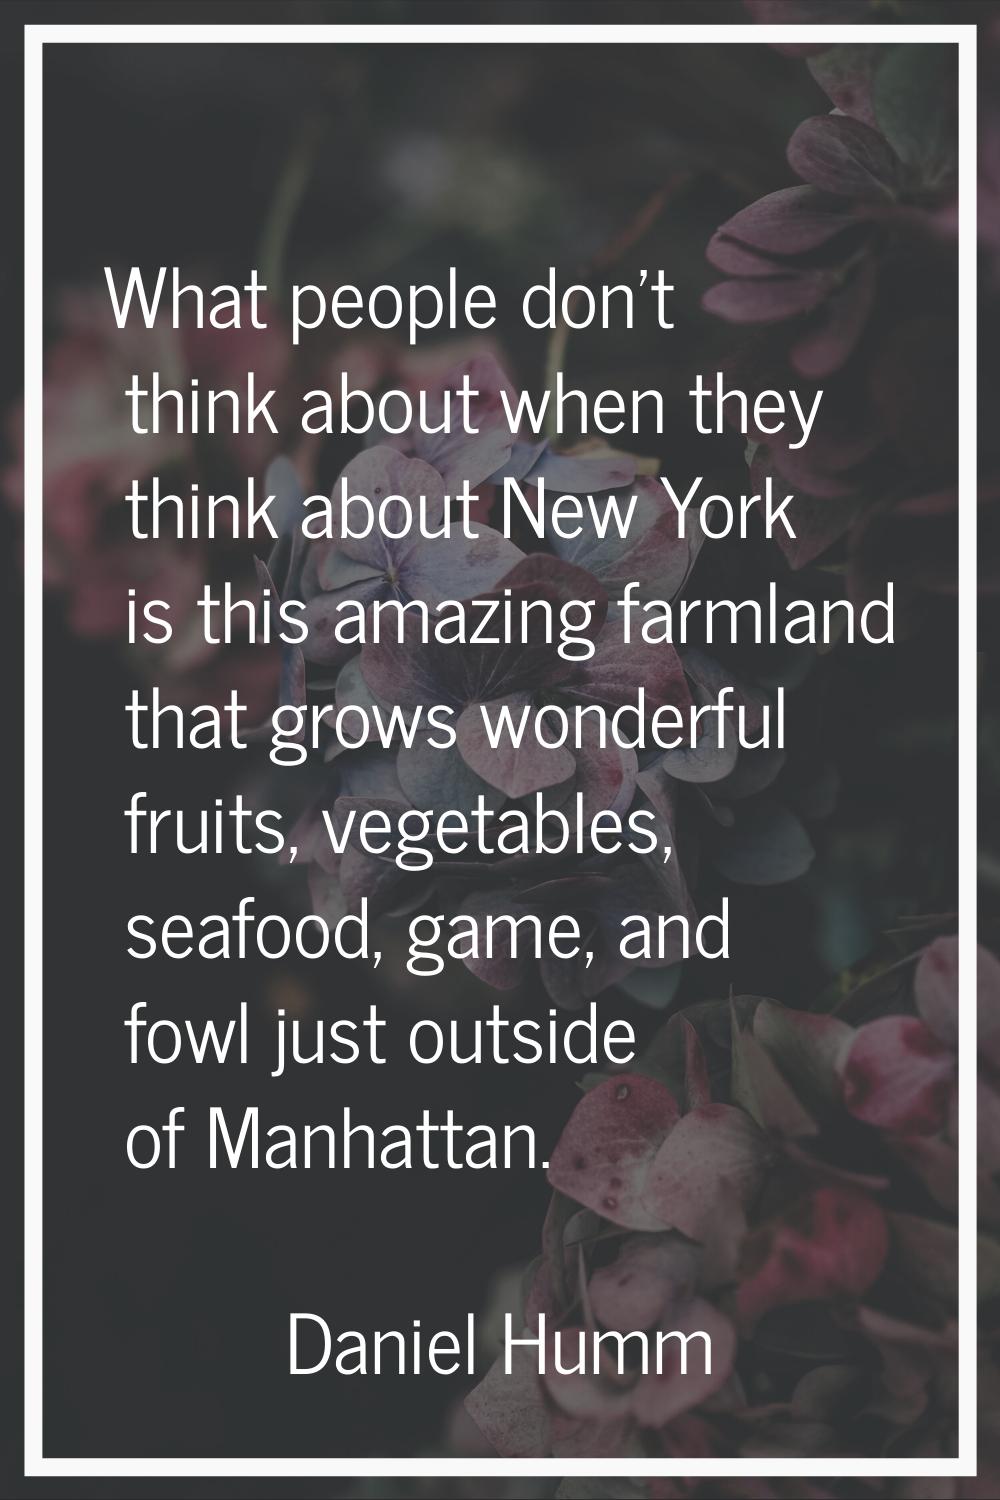 What people don't think about when they think about New York is this amazing farmland that grows wo